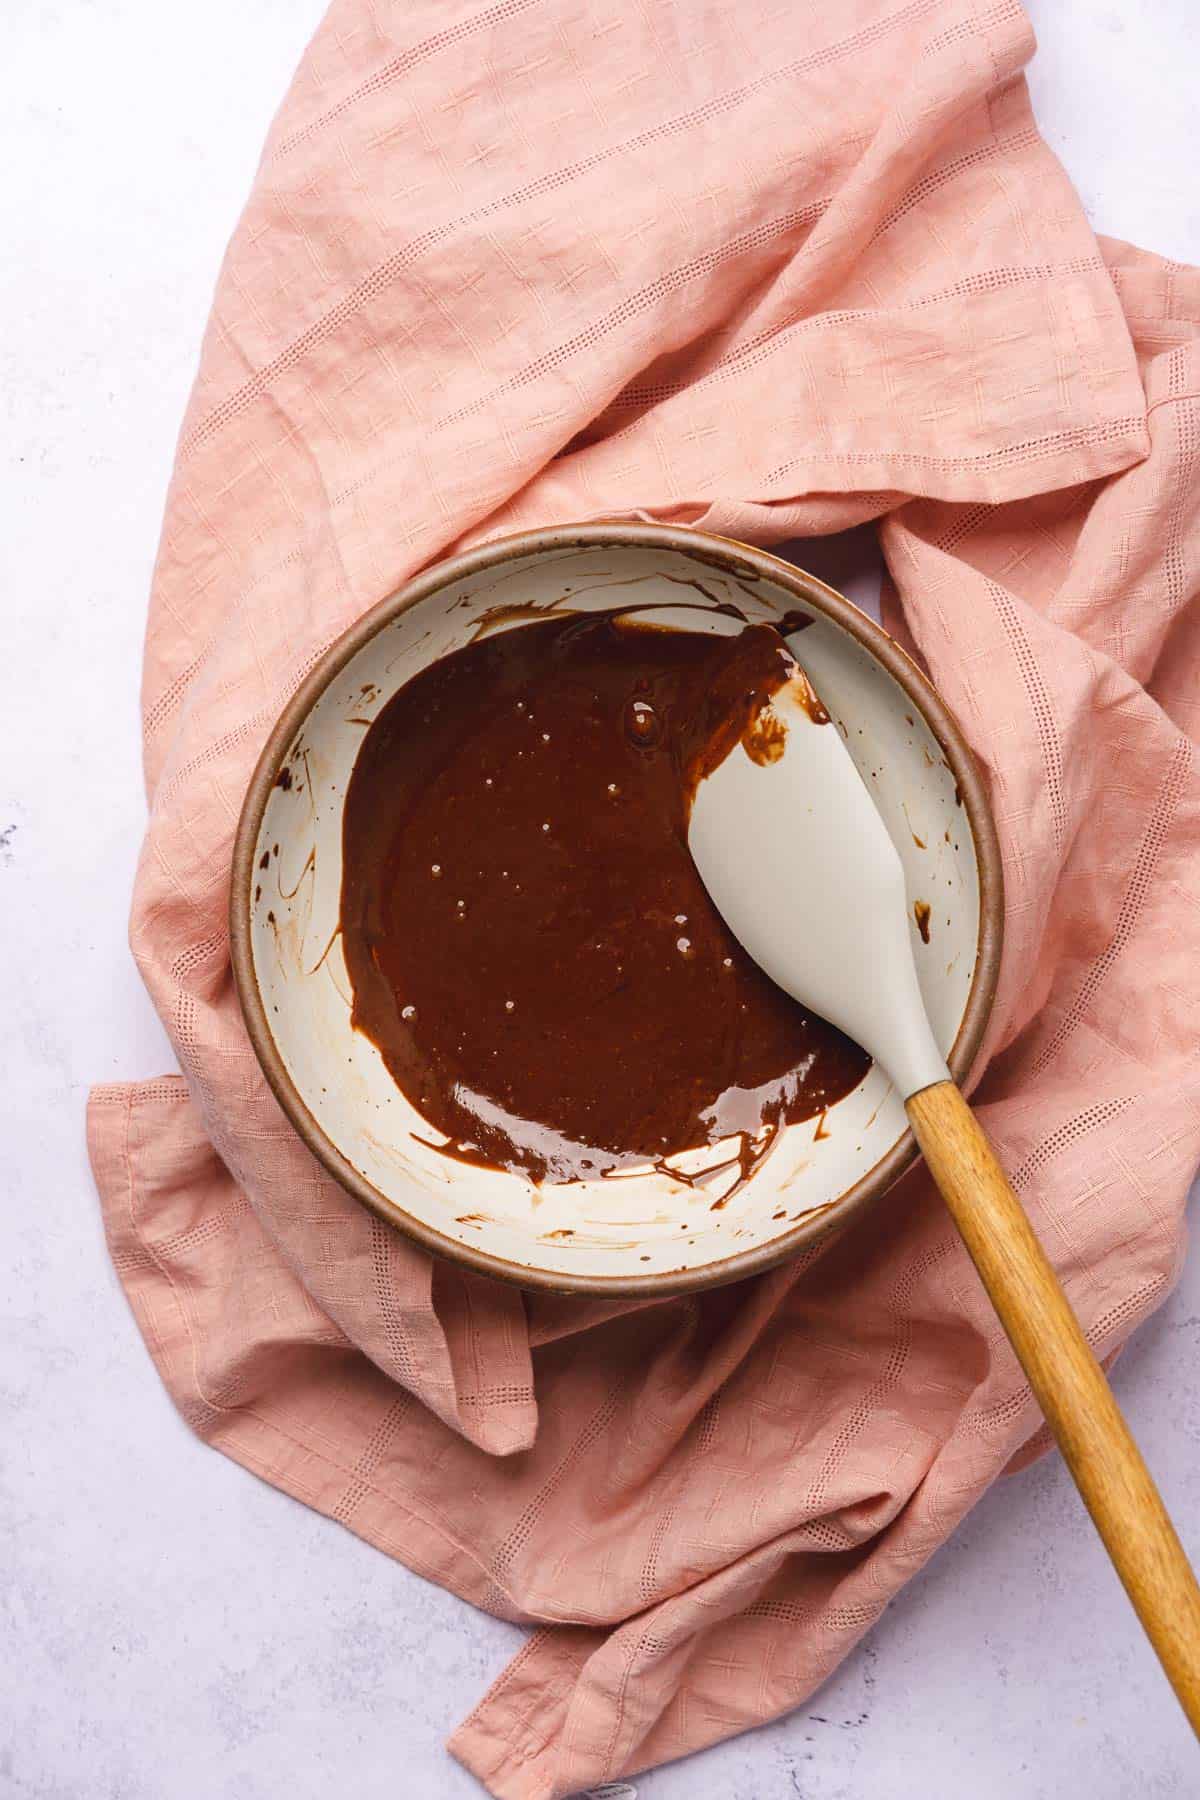 mixing chocolate ganache in a ceramic bowl with a rubber spatula